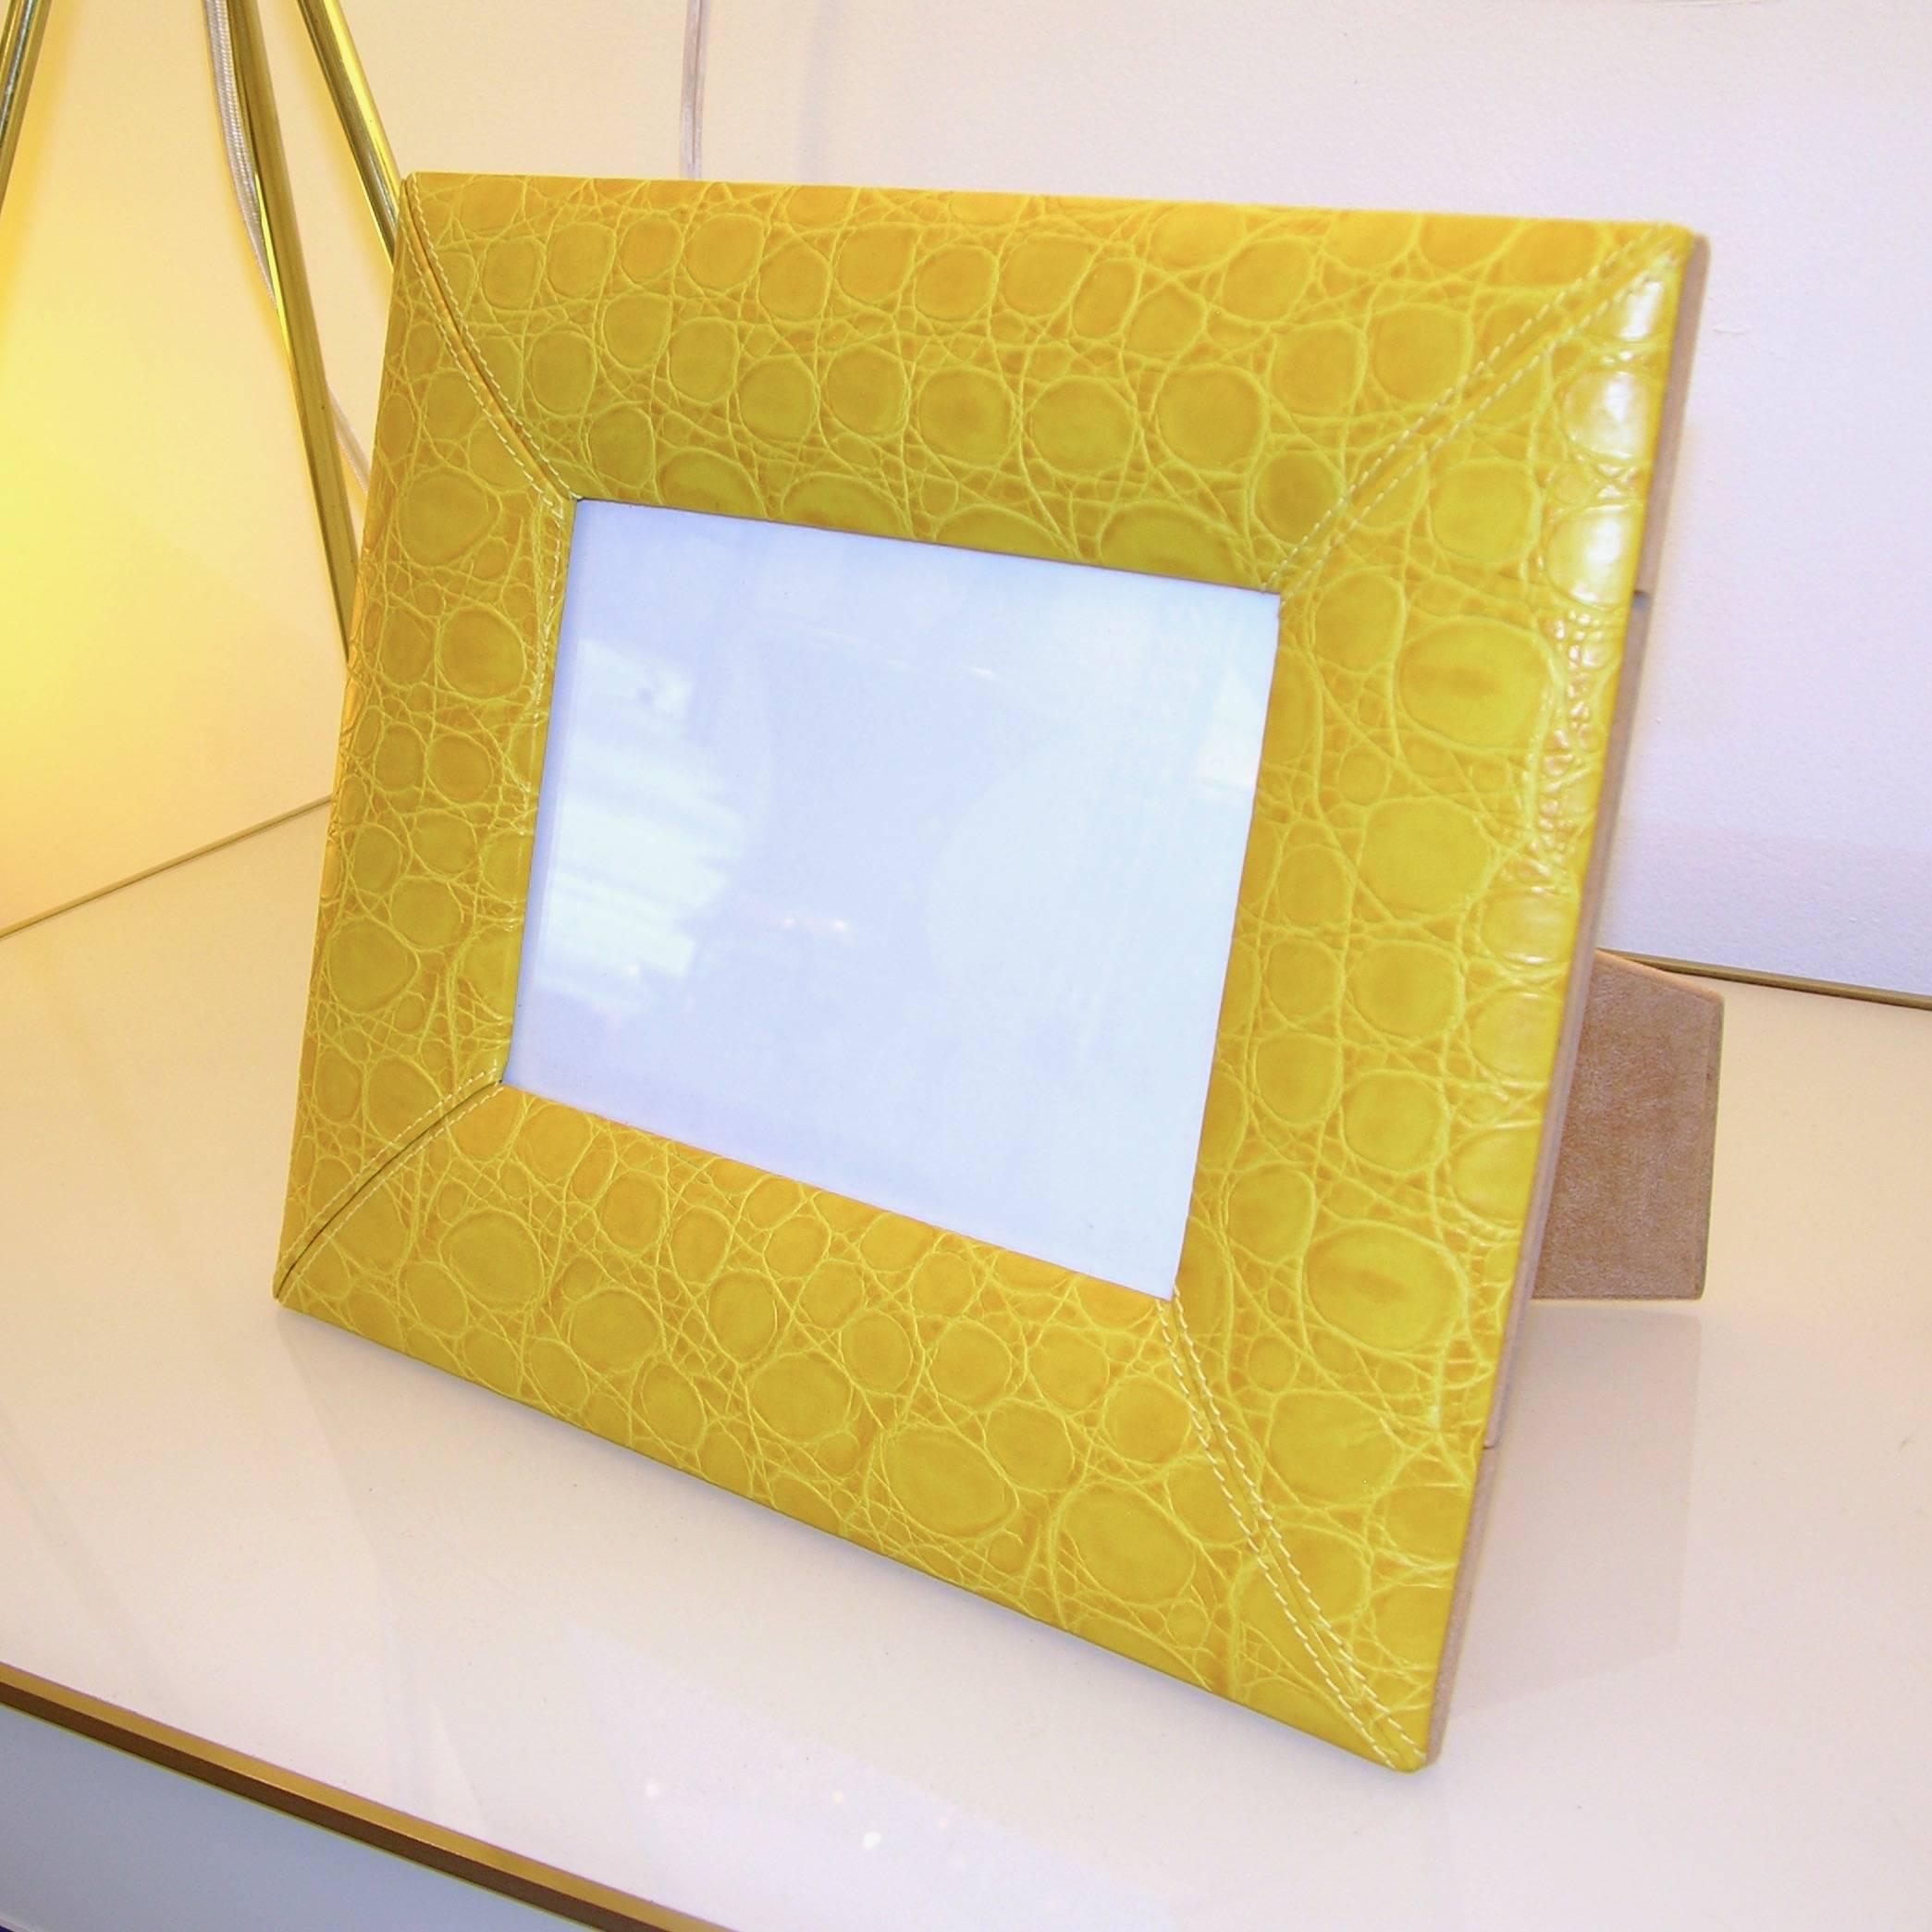 Modern photo frame of clean design, signed by the fashion designer Cesare Paciotti, high quality of Italian handmade execution, in stitched embossed leather in lemon yellow color, with beige felt back.
Photo placement measures: 6.75 x 4.75.
Can